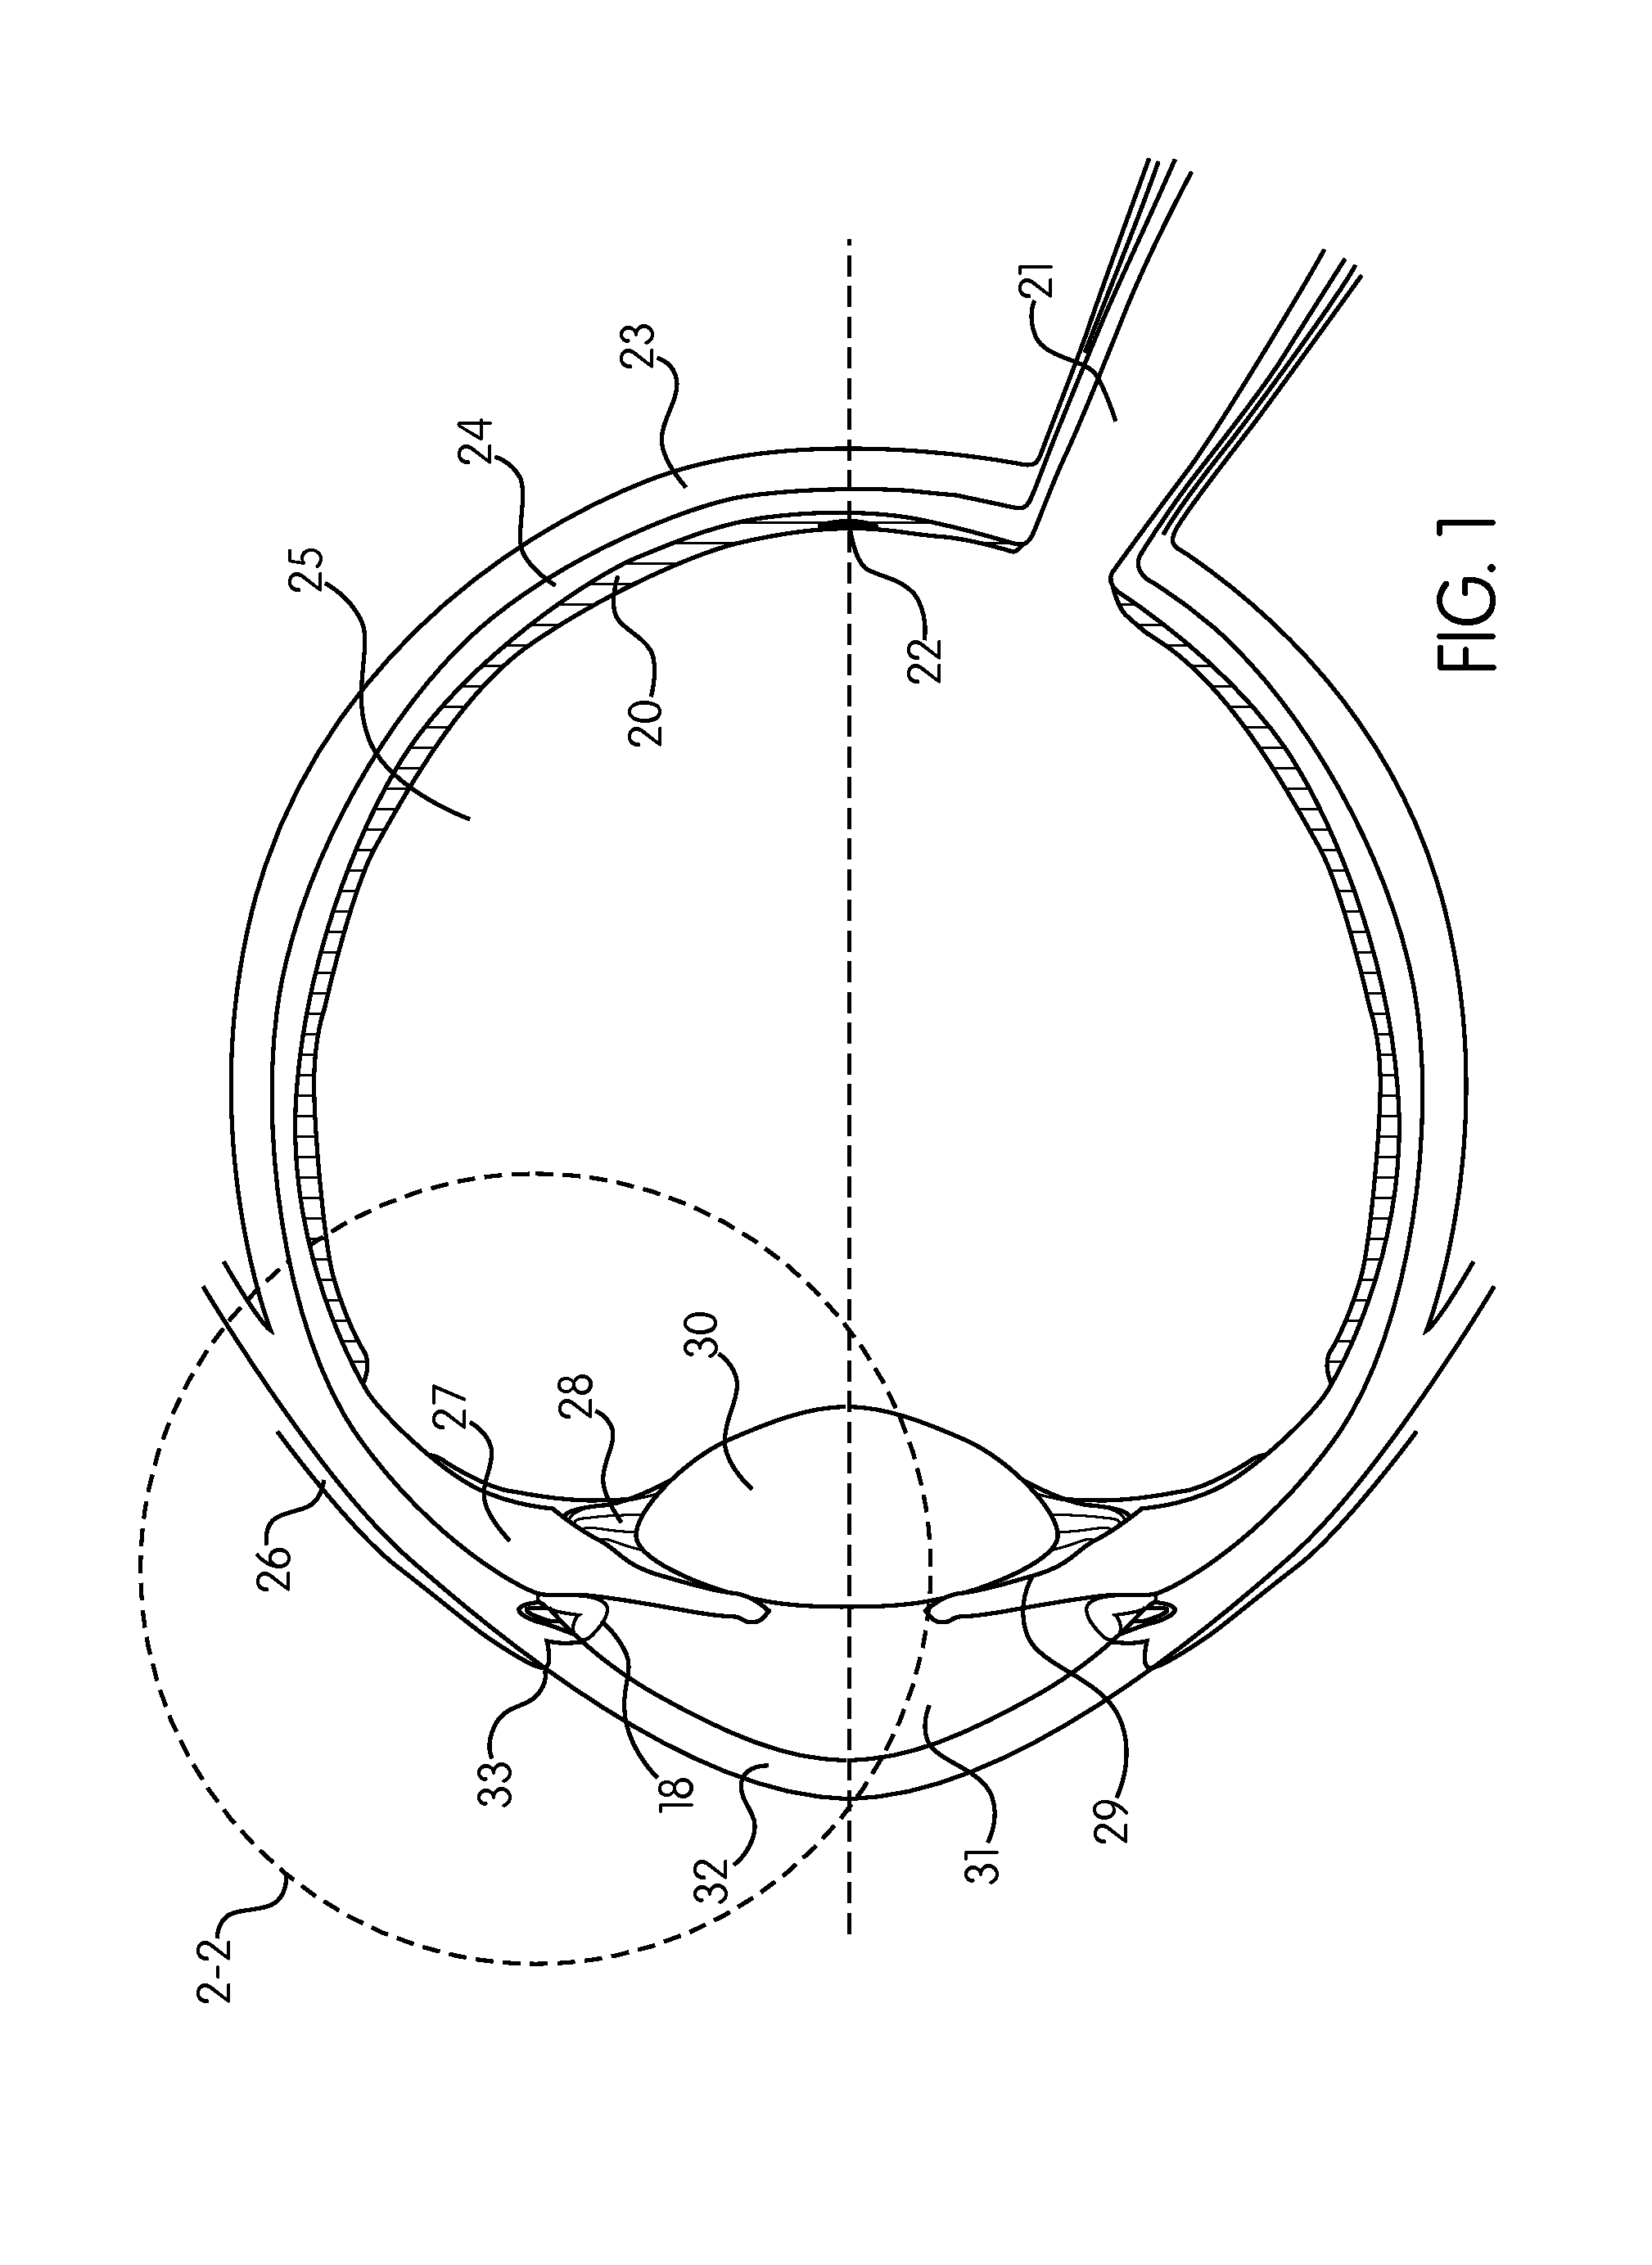 Ocular collar stent for treating narrowing of the irideocorneal angle